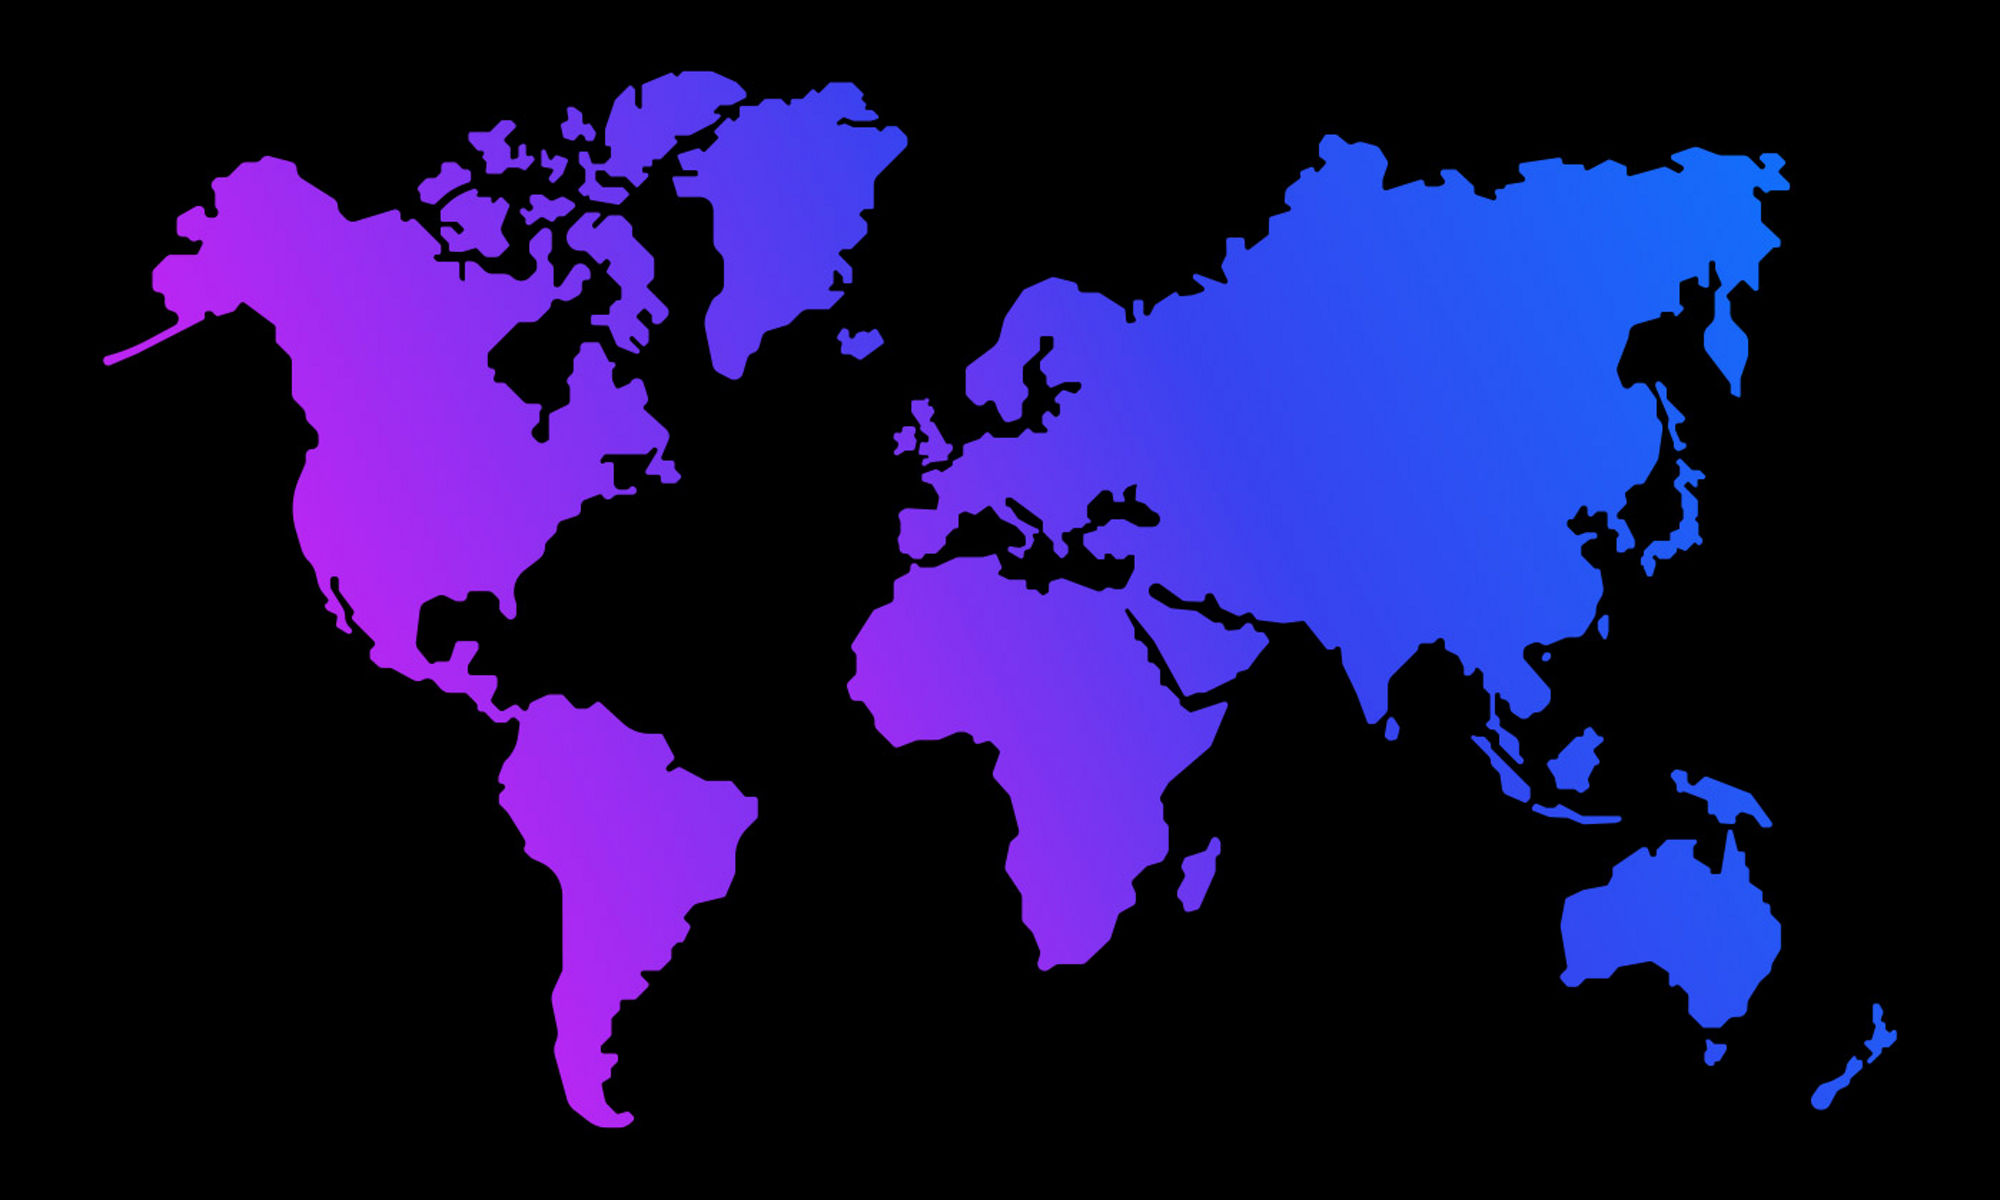 Global map in blue and purple shades